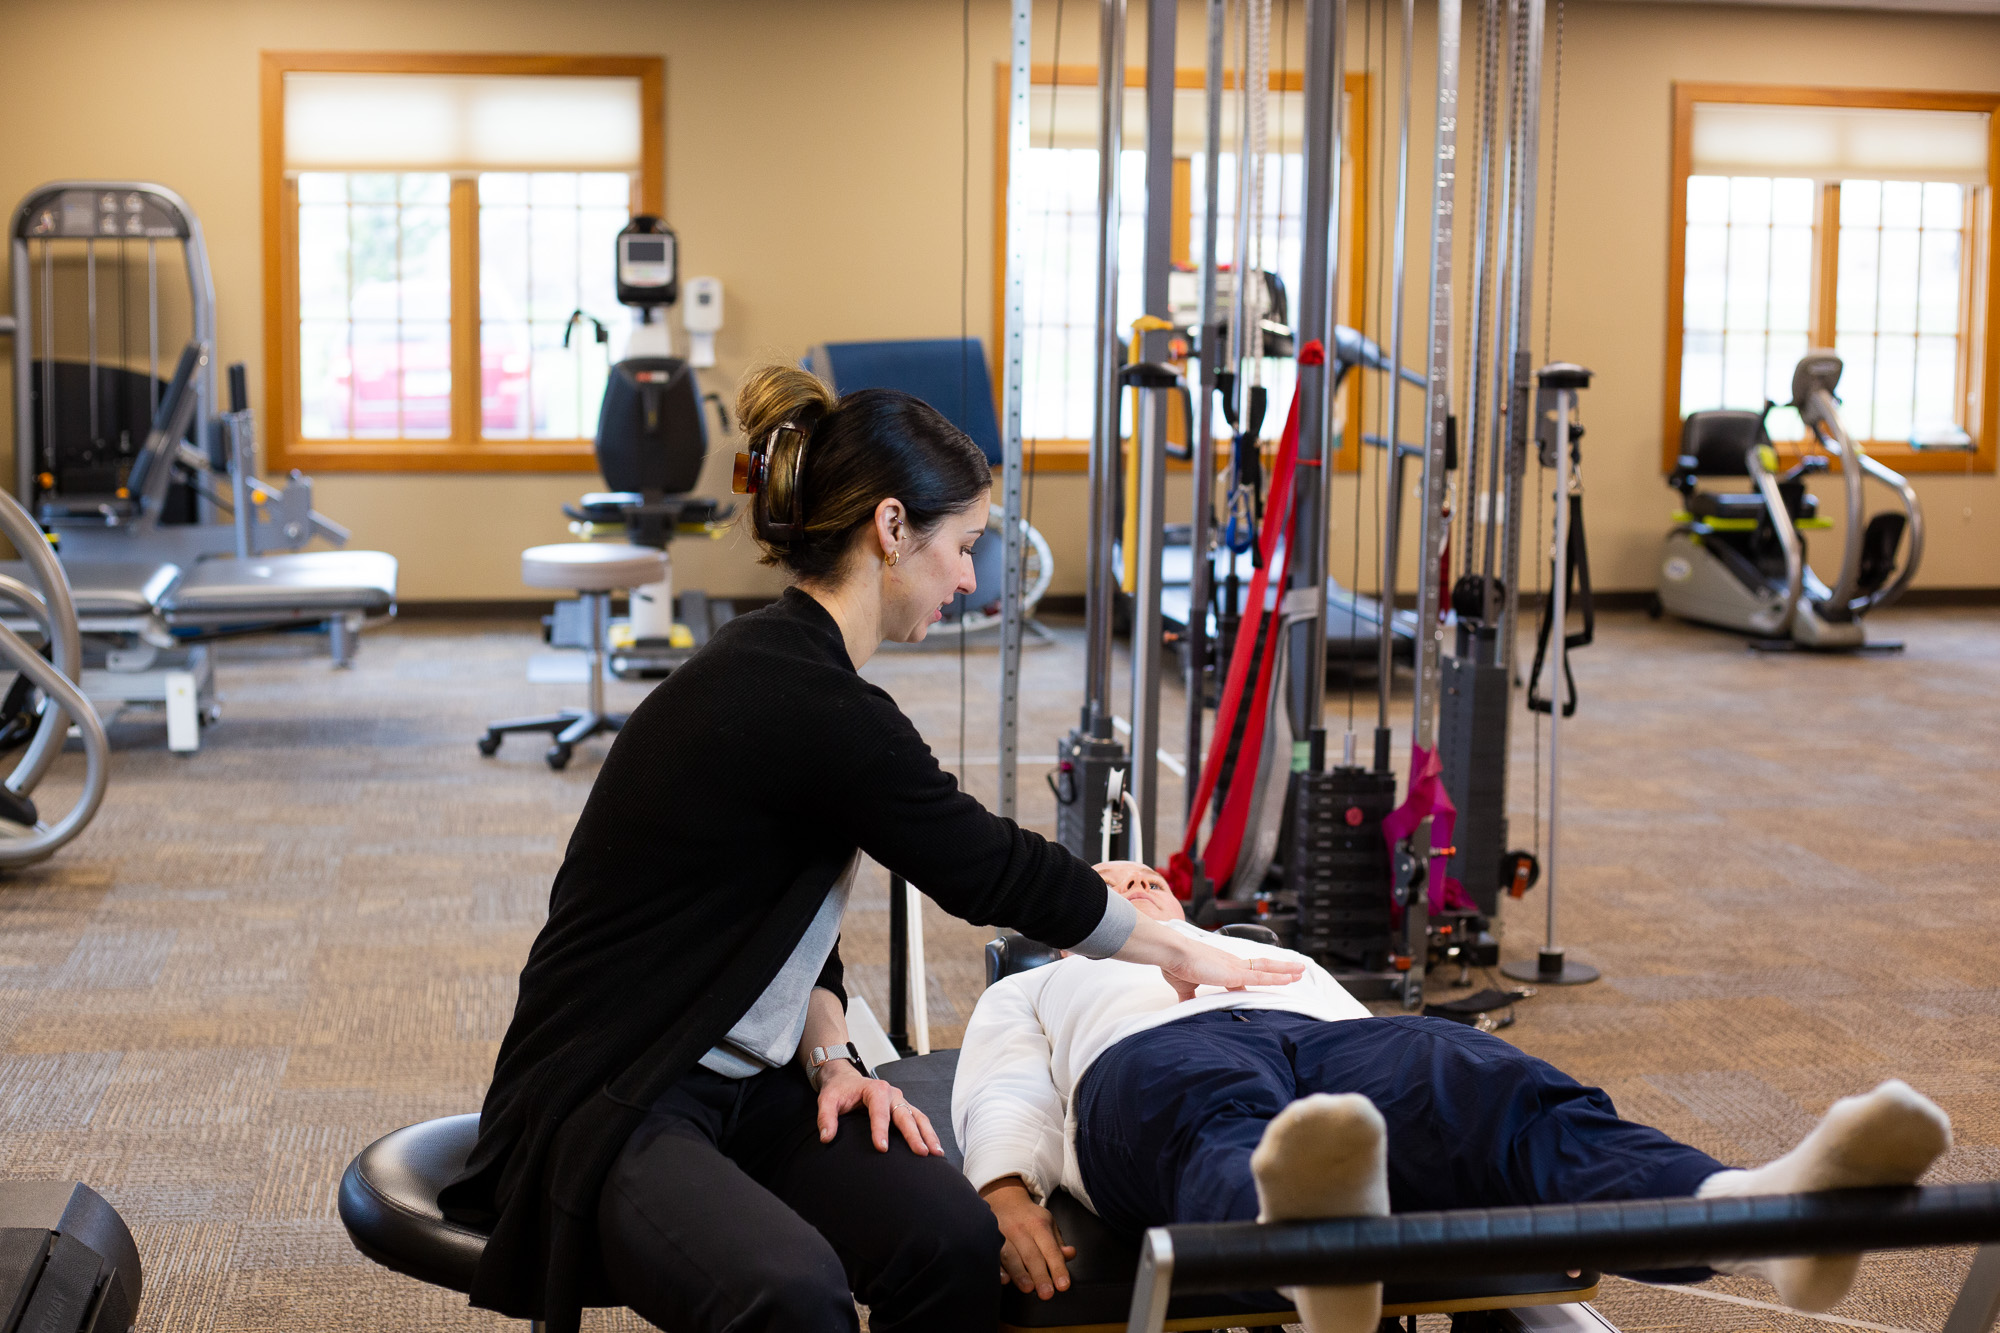 Mercedes Stein, Physical Therapist, helps a patient with pelvic floor therapy